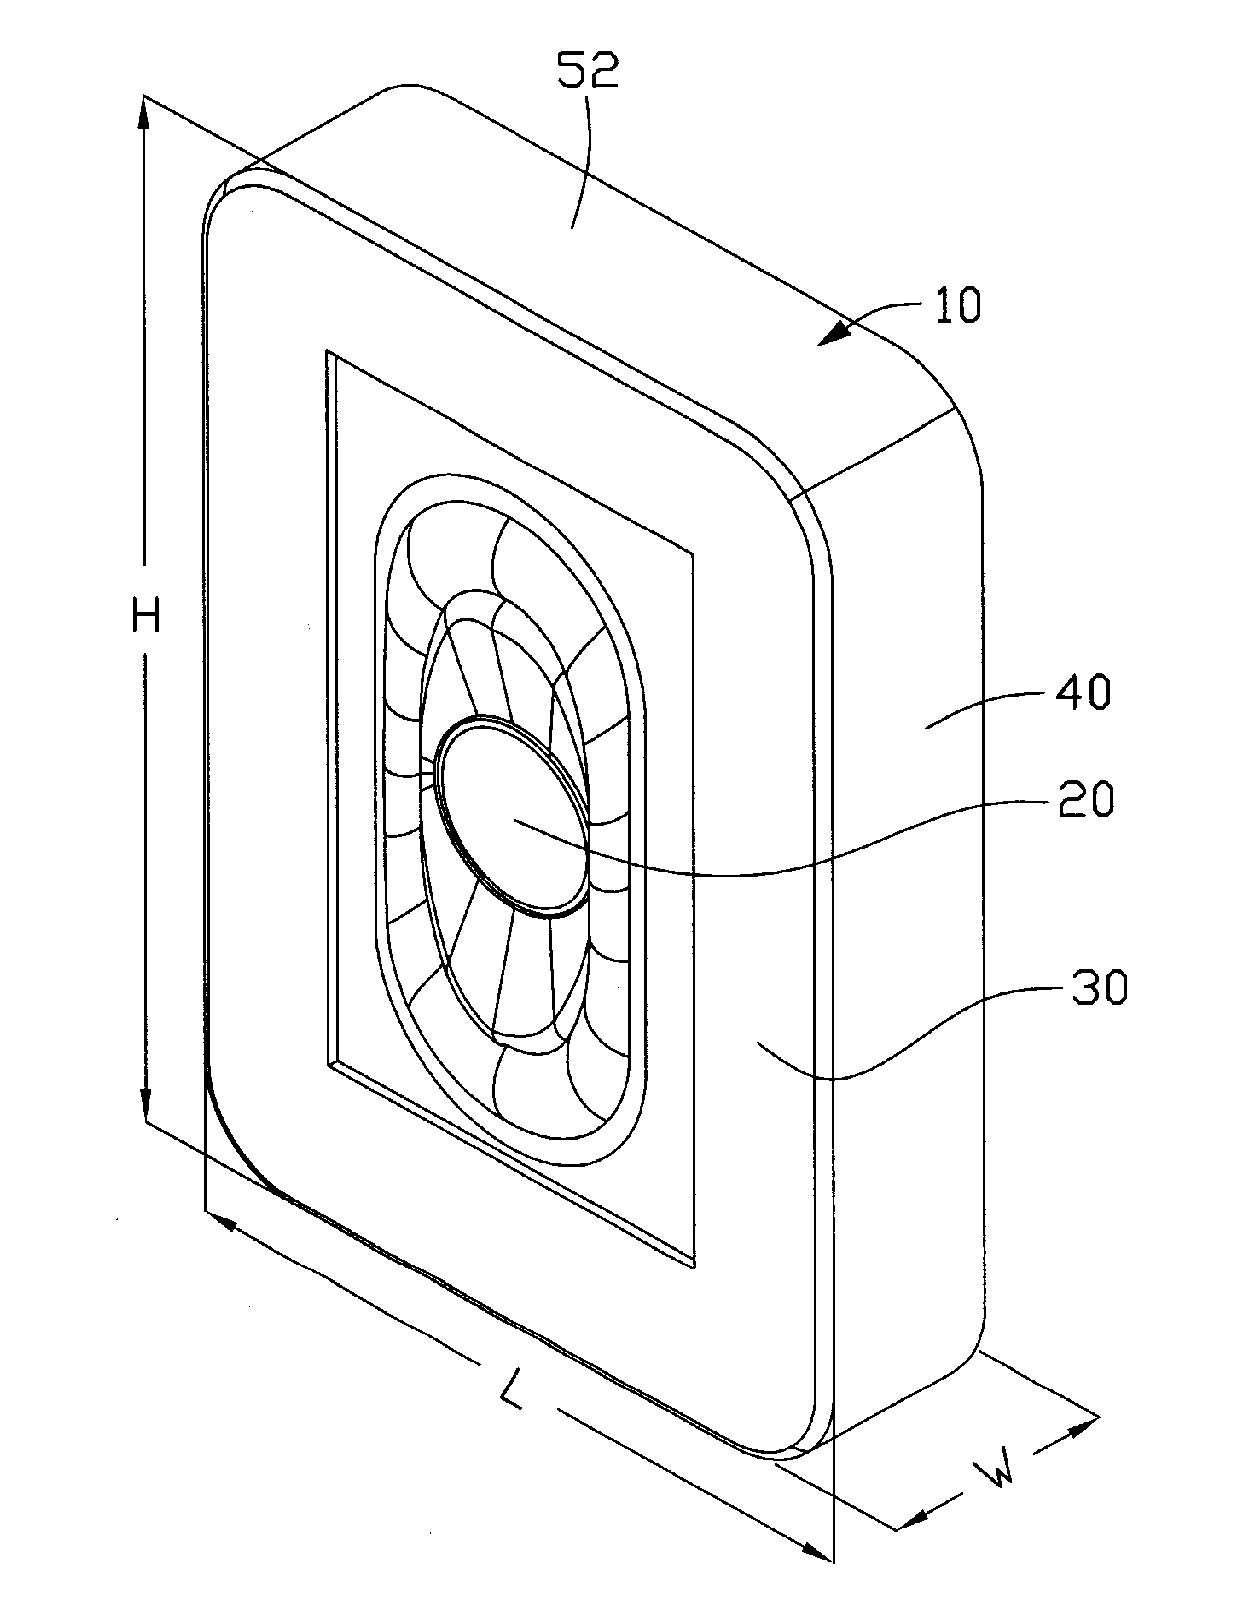 Speaker module with expandable enclosure